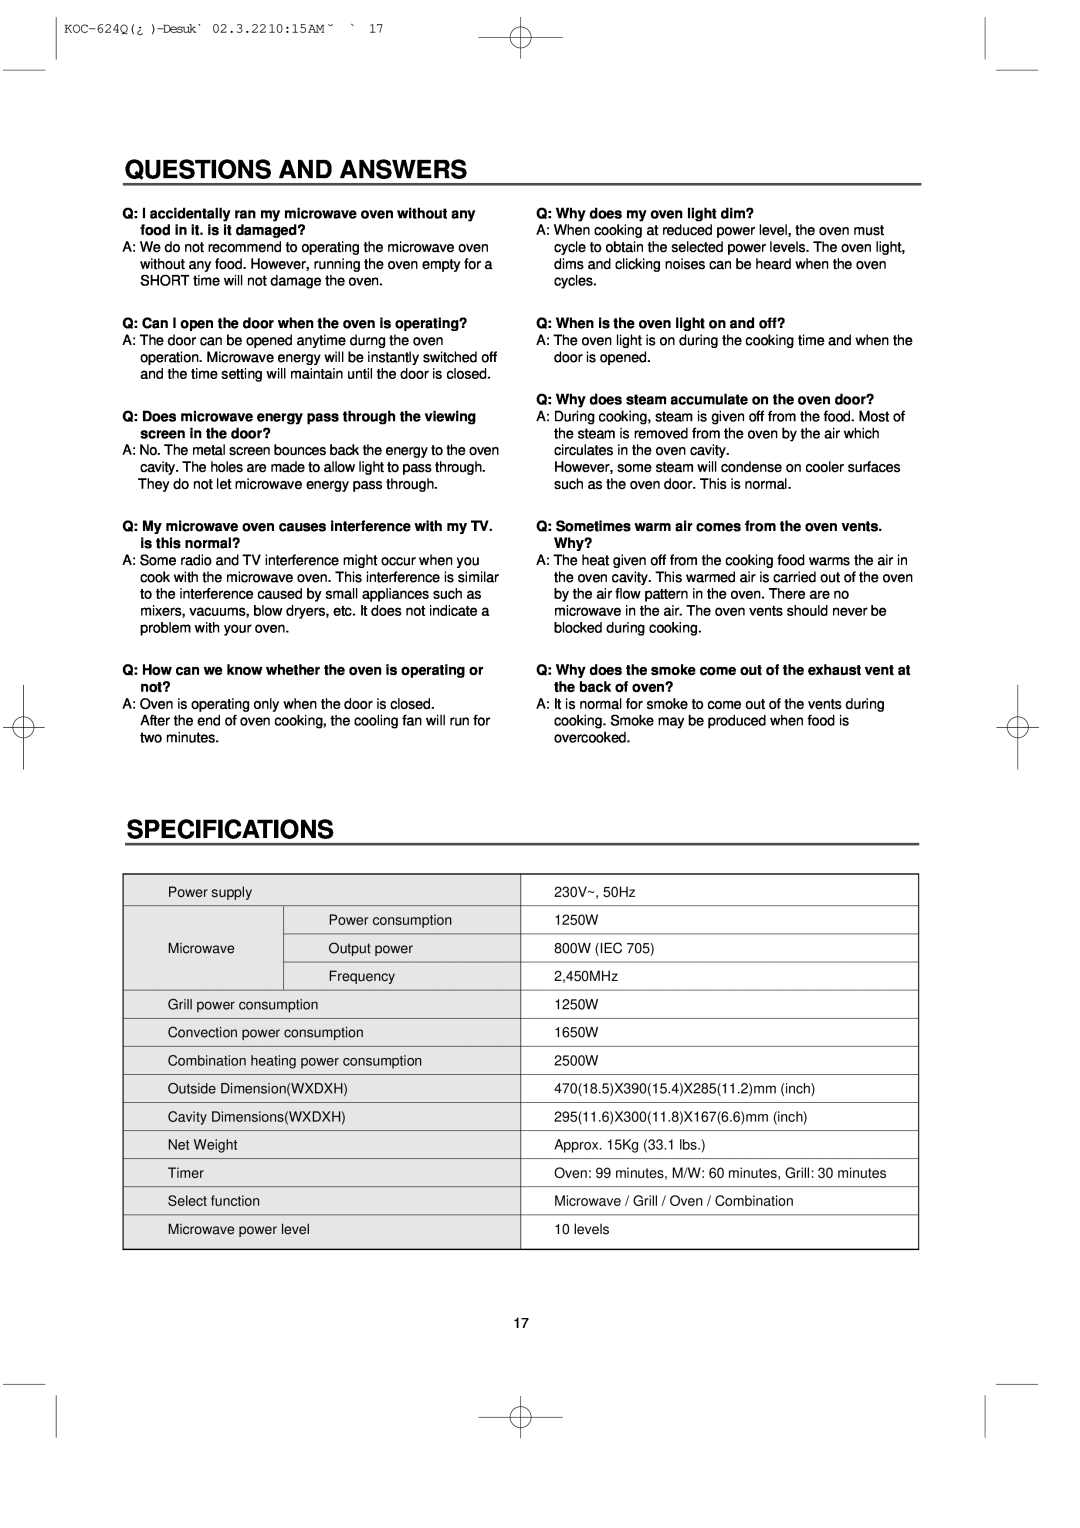 Daewoo KOC-624Q owner manual Questions And Answers, Specifications, Q Can I open the door when the oven is operating? 